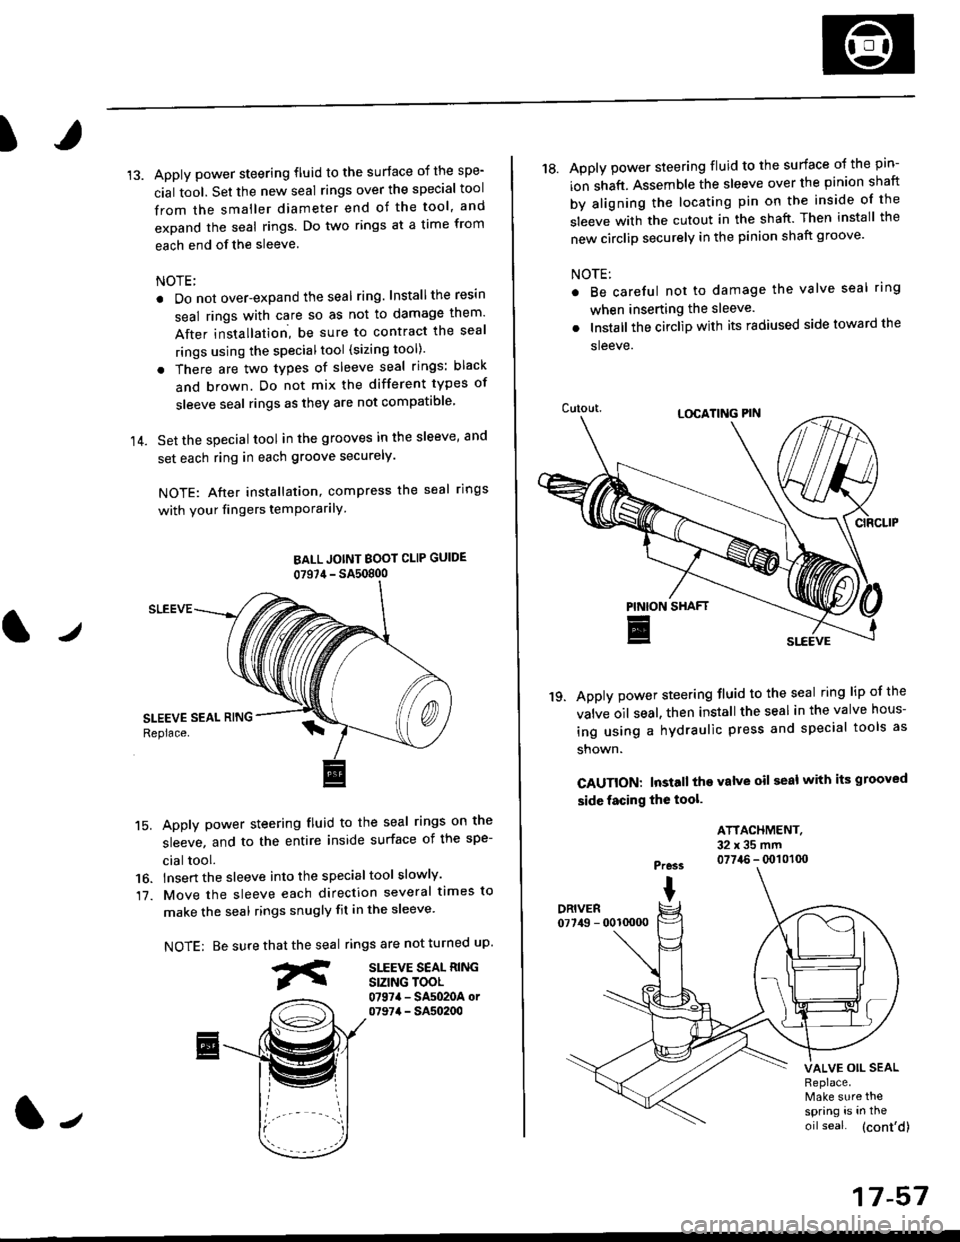 HONDA CIVIC 1999 6.G Workshop Manual I
14.
Apply power steering fluid to the surface of the spe-
cial tool. Set the new seal rings over the special tool
from the smaller diameter end of the tool, and
expand the seal rings. Do two rings a